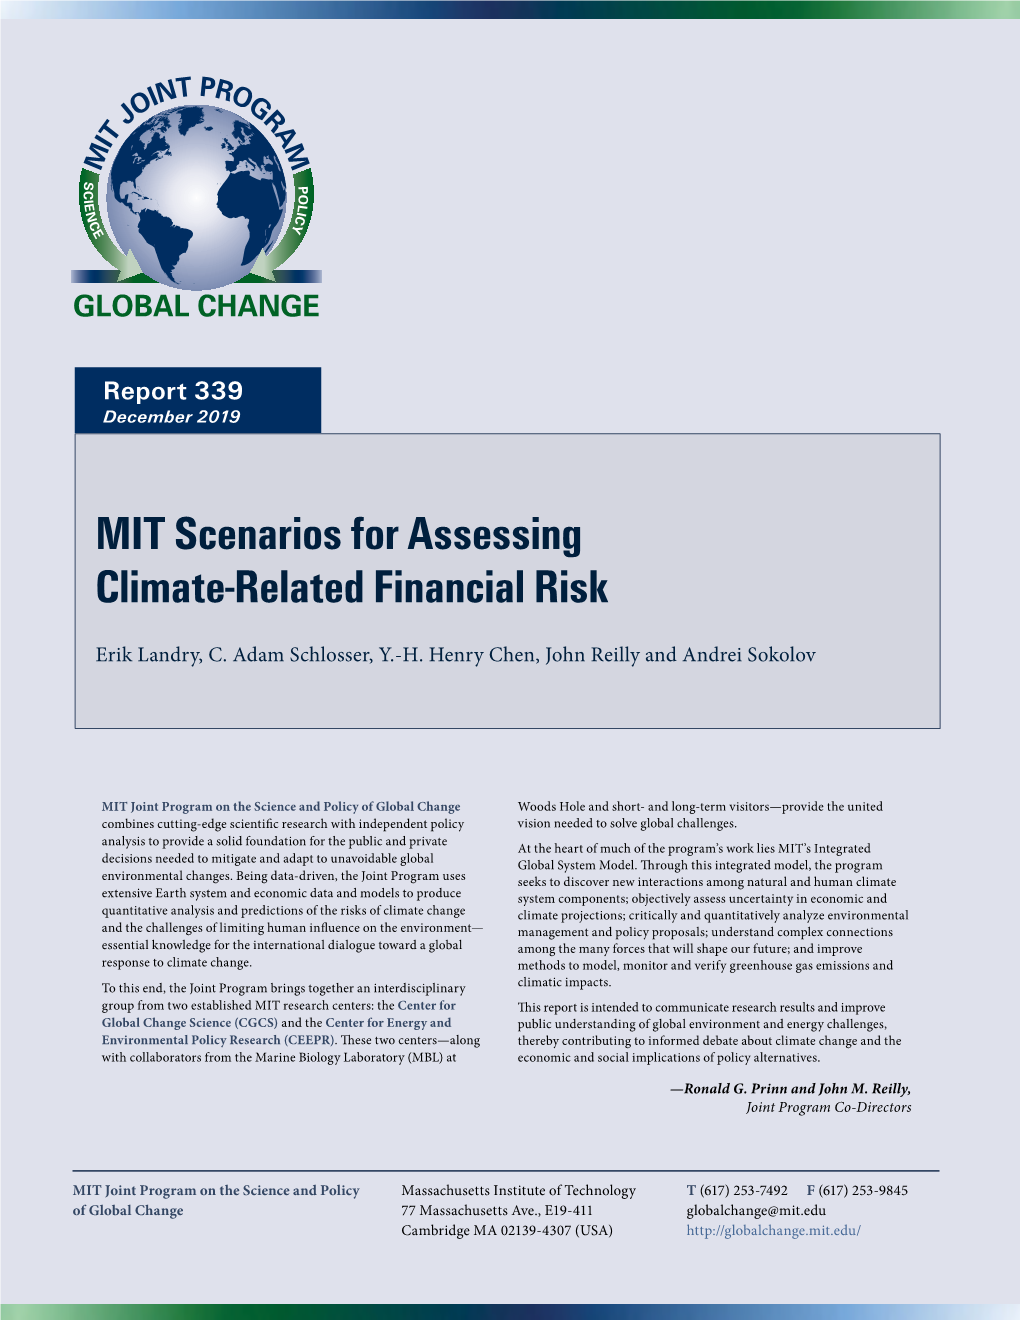 MIT Scenarios for Assessing Climate-Related Financial Risk